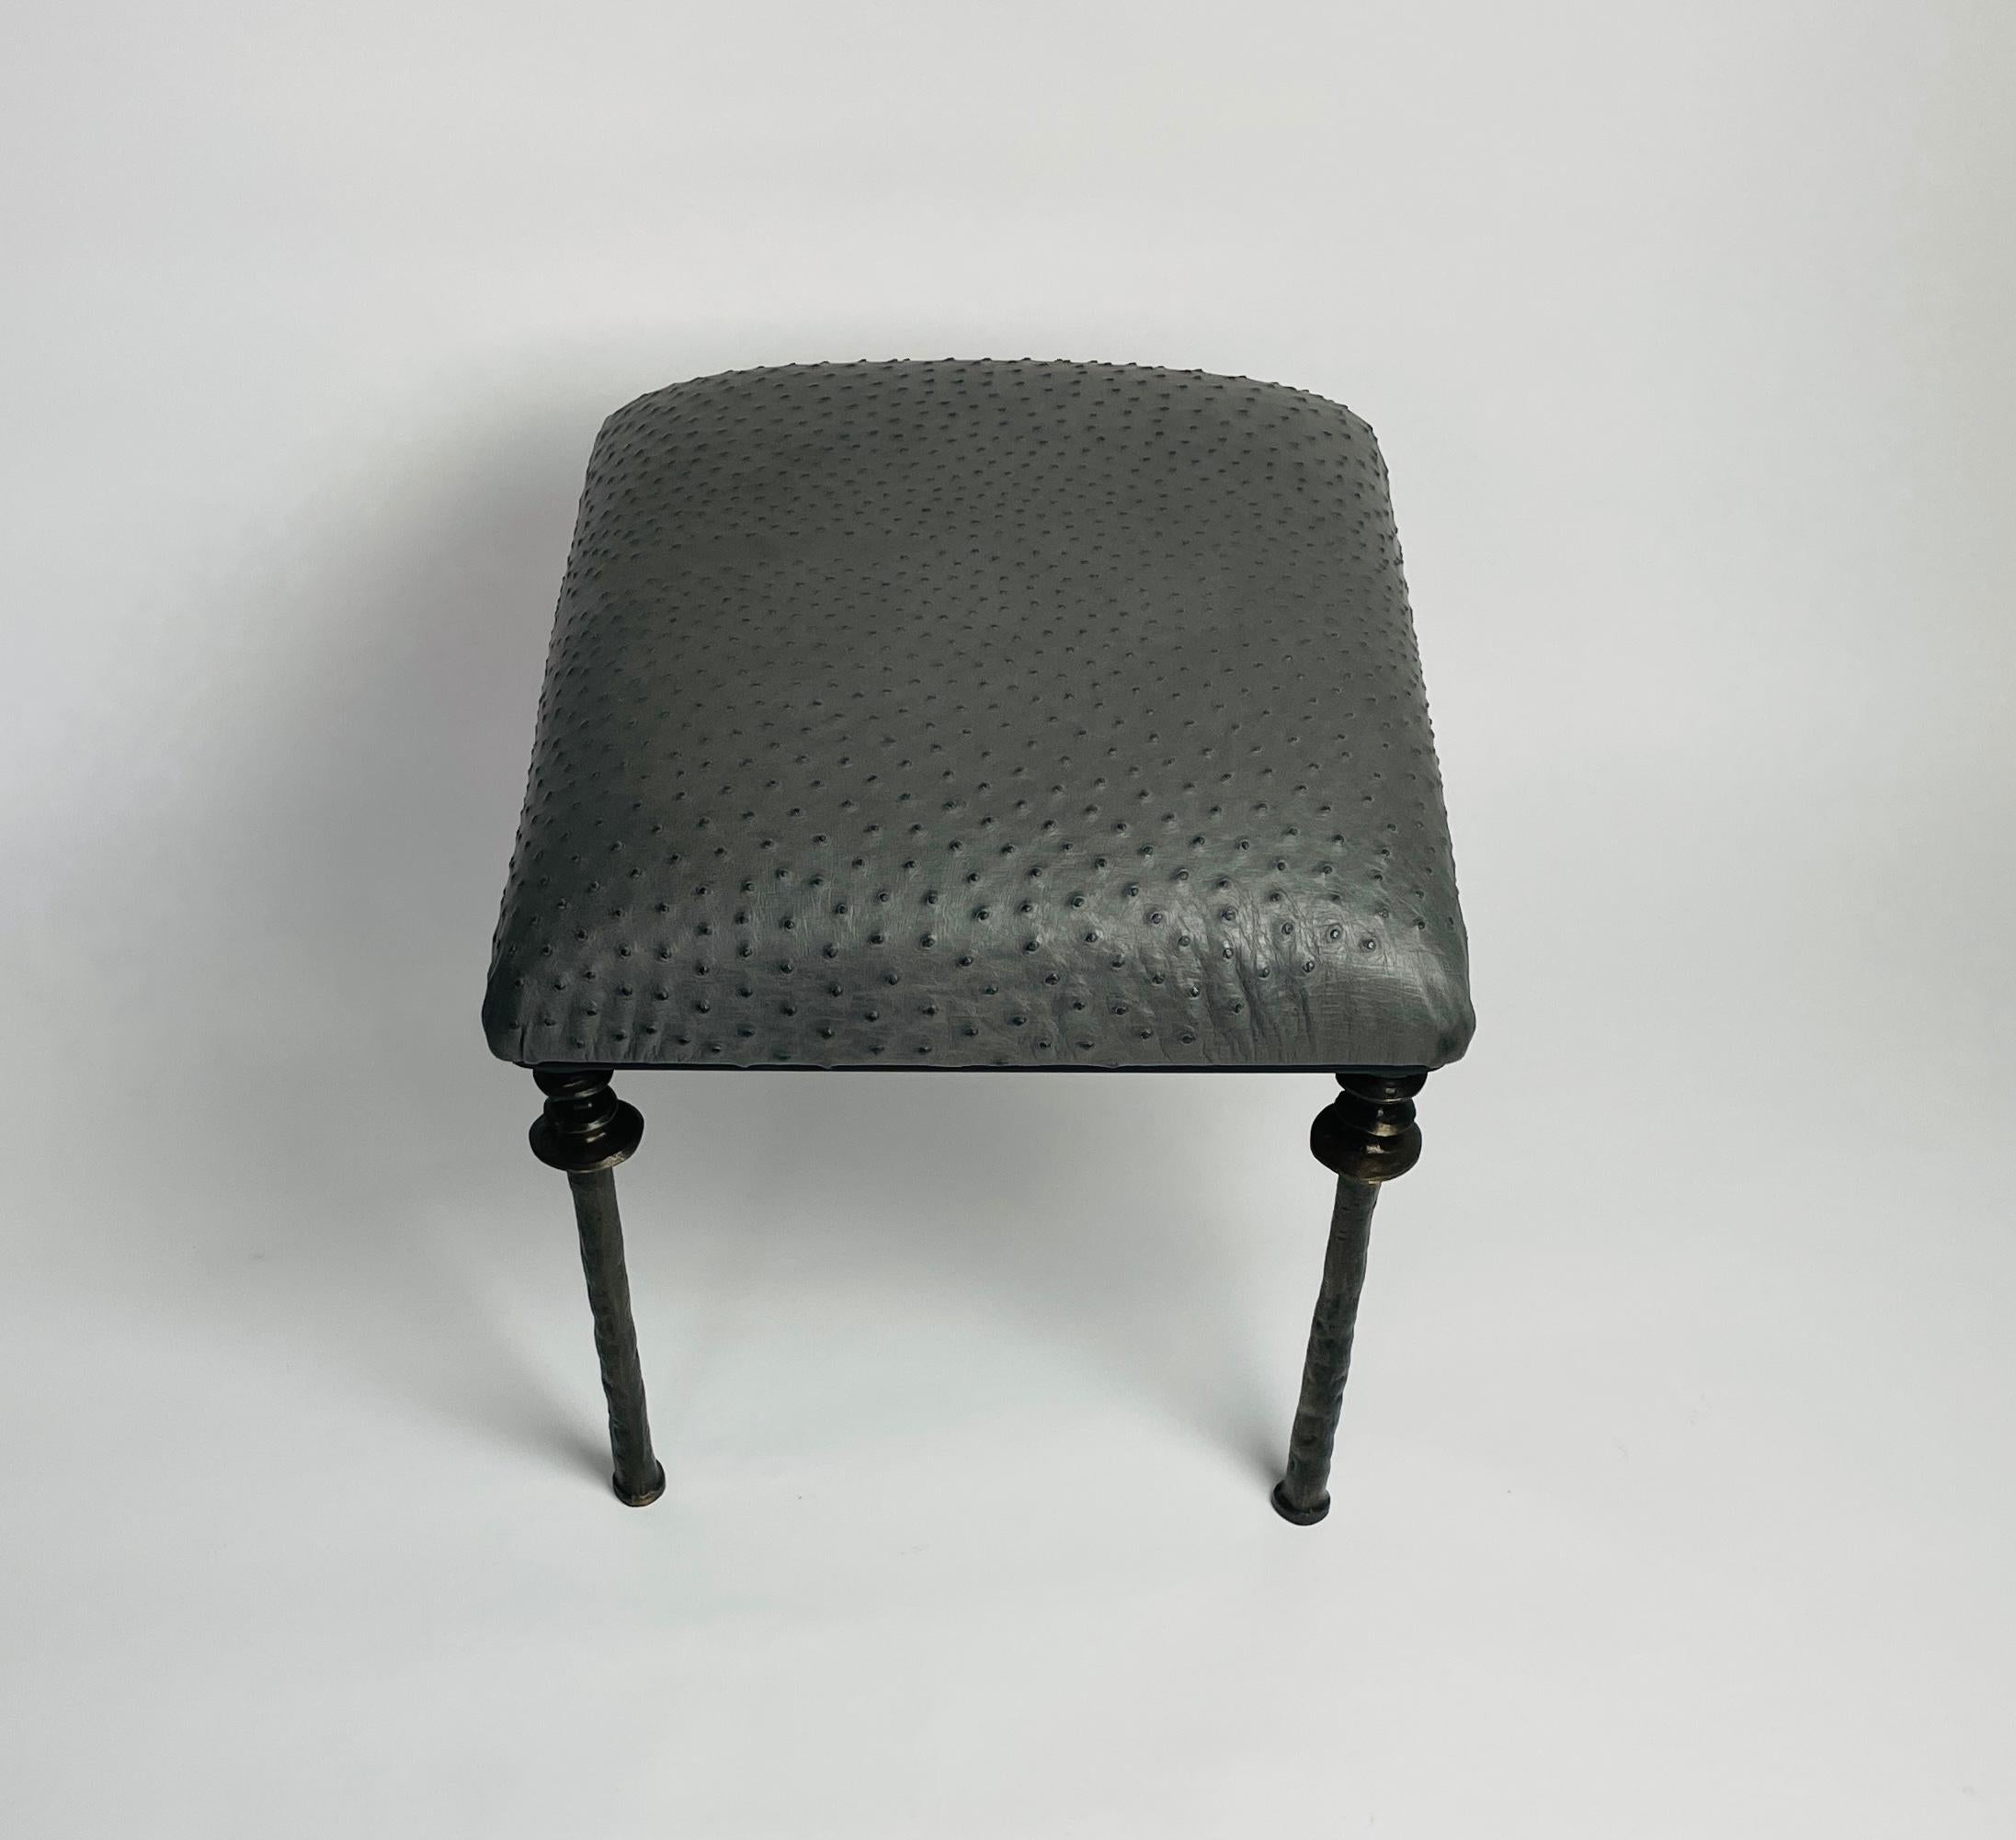 Contemporary Pair of Sorgue Stools, by Bourgeois Boheme Atelier, Anthracite Ostrich Leather